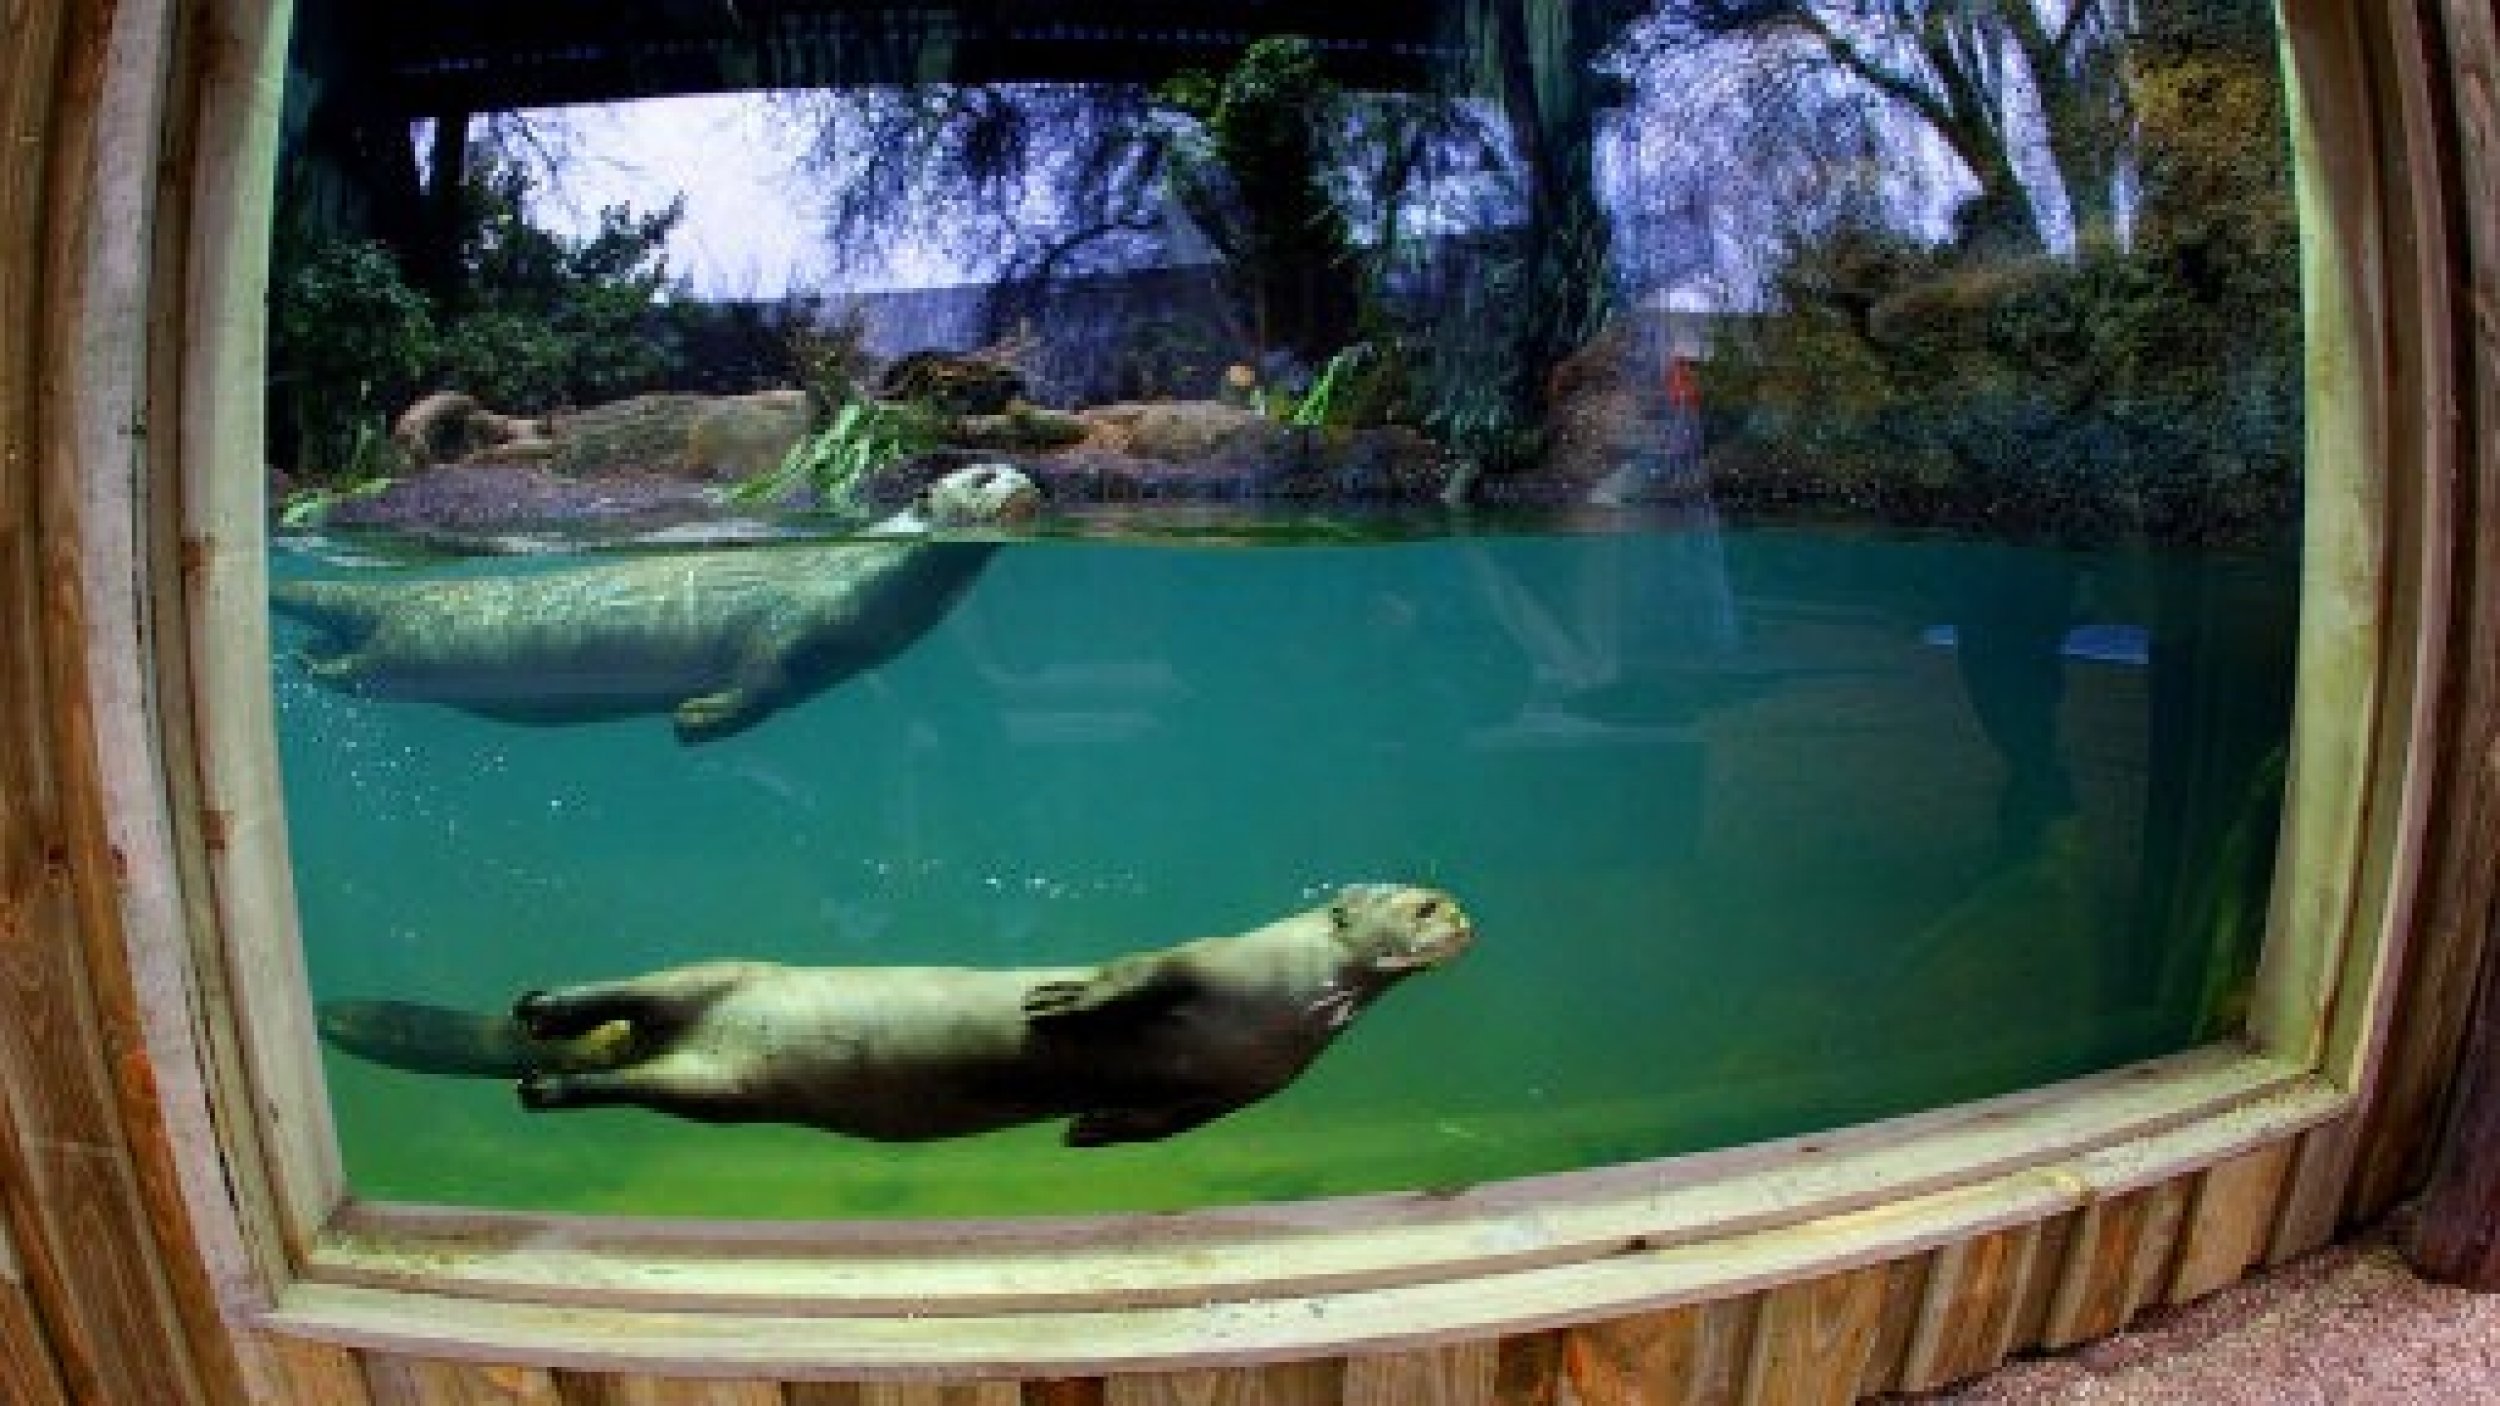 Giant otters at Chester Zoo, where the UK039s first underwater viewing zone for giant otters will open next week.